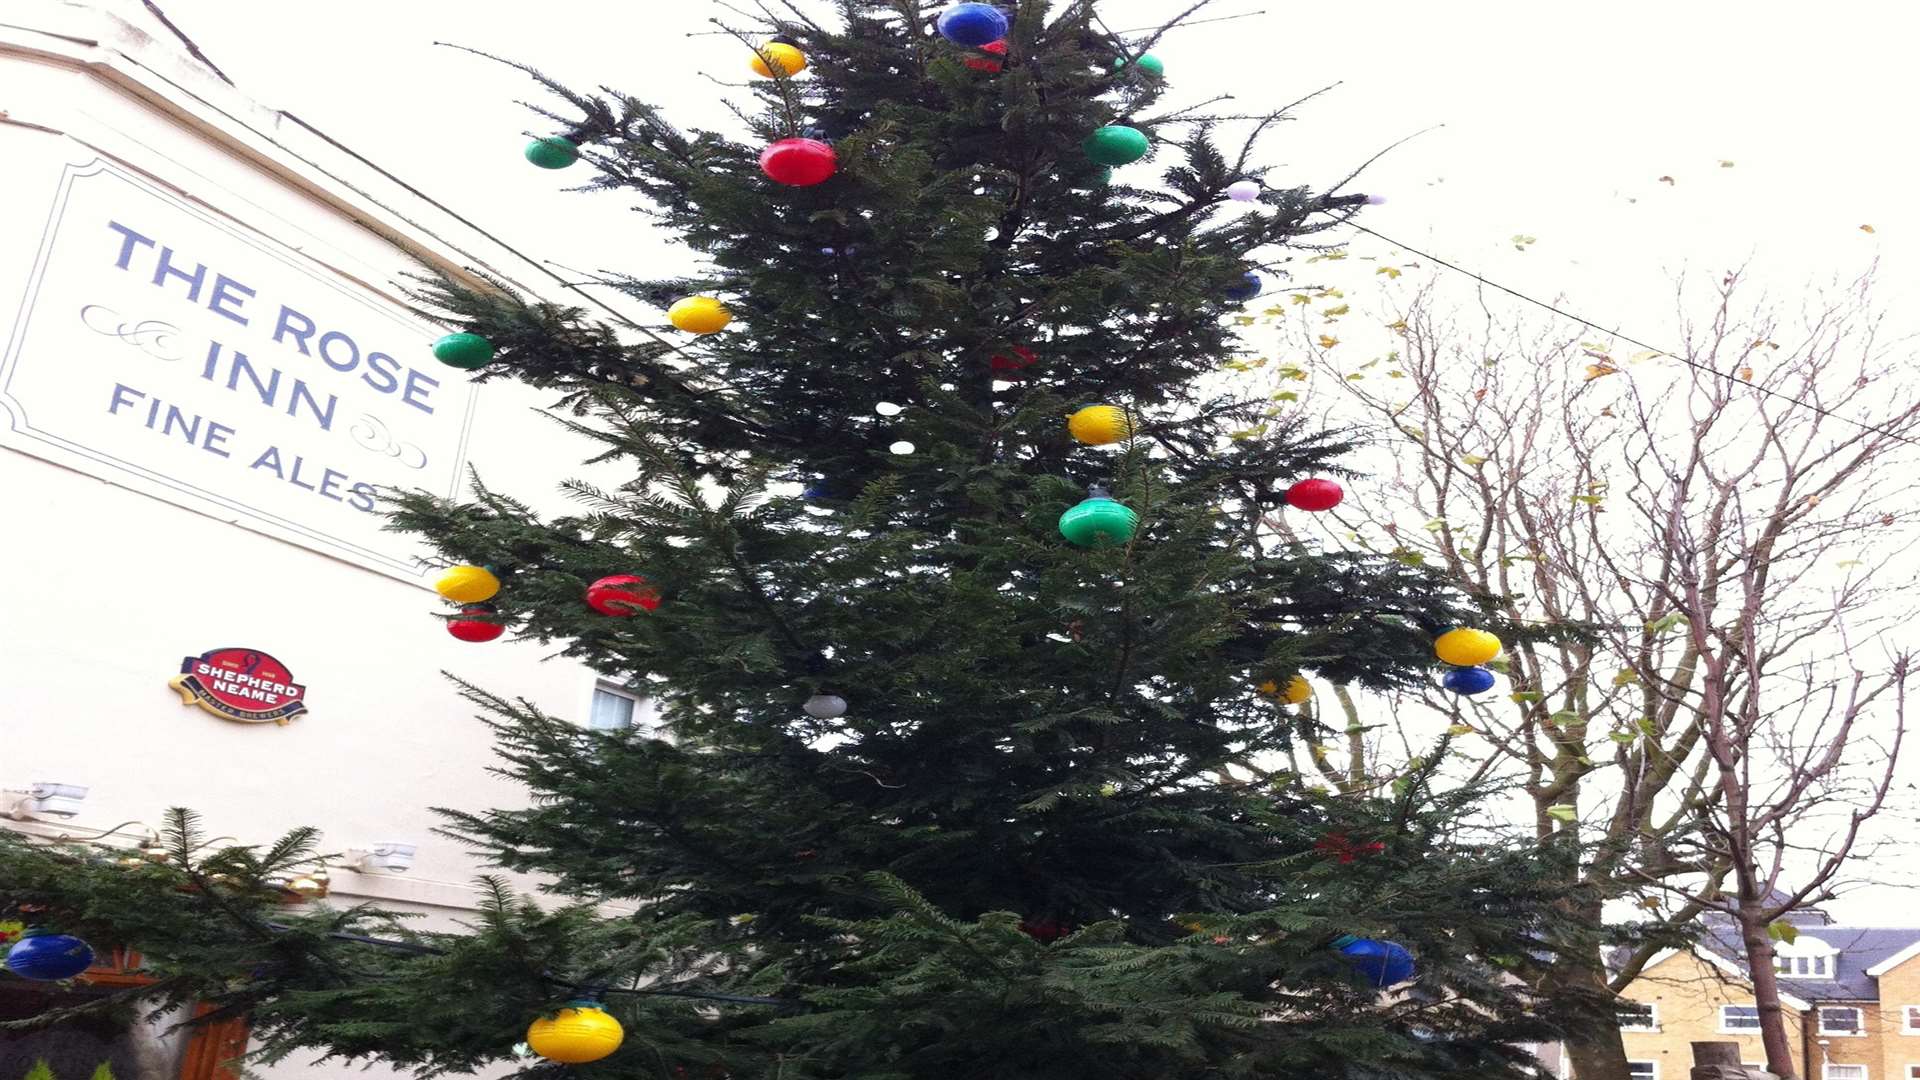 Herne Bay christmas tree dubbed the 'worst in Britain'